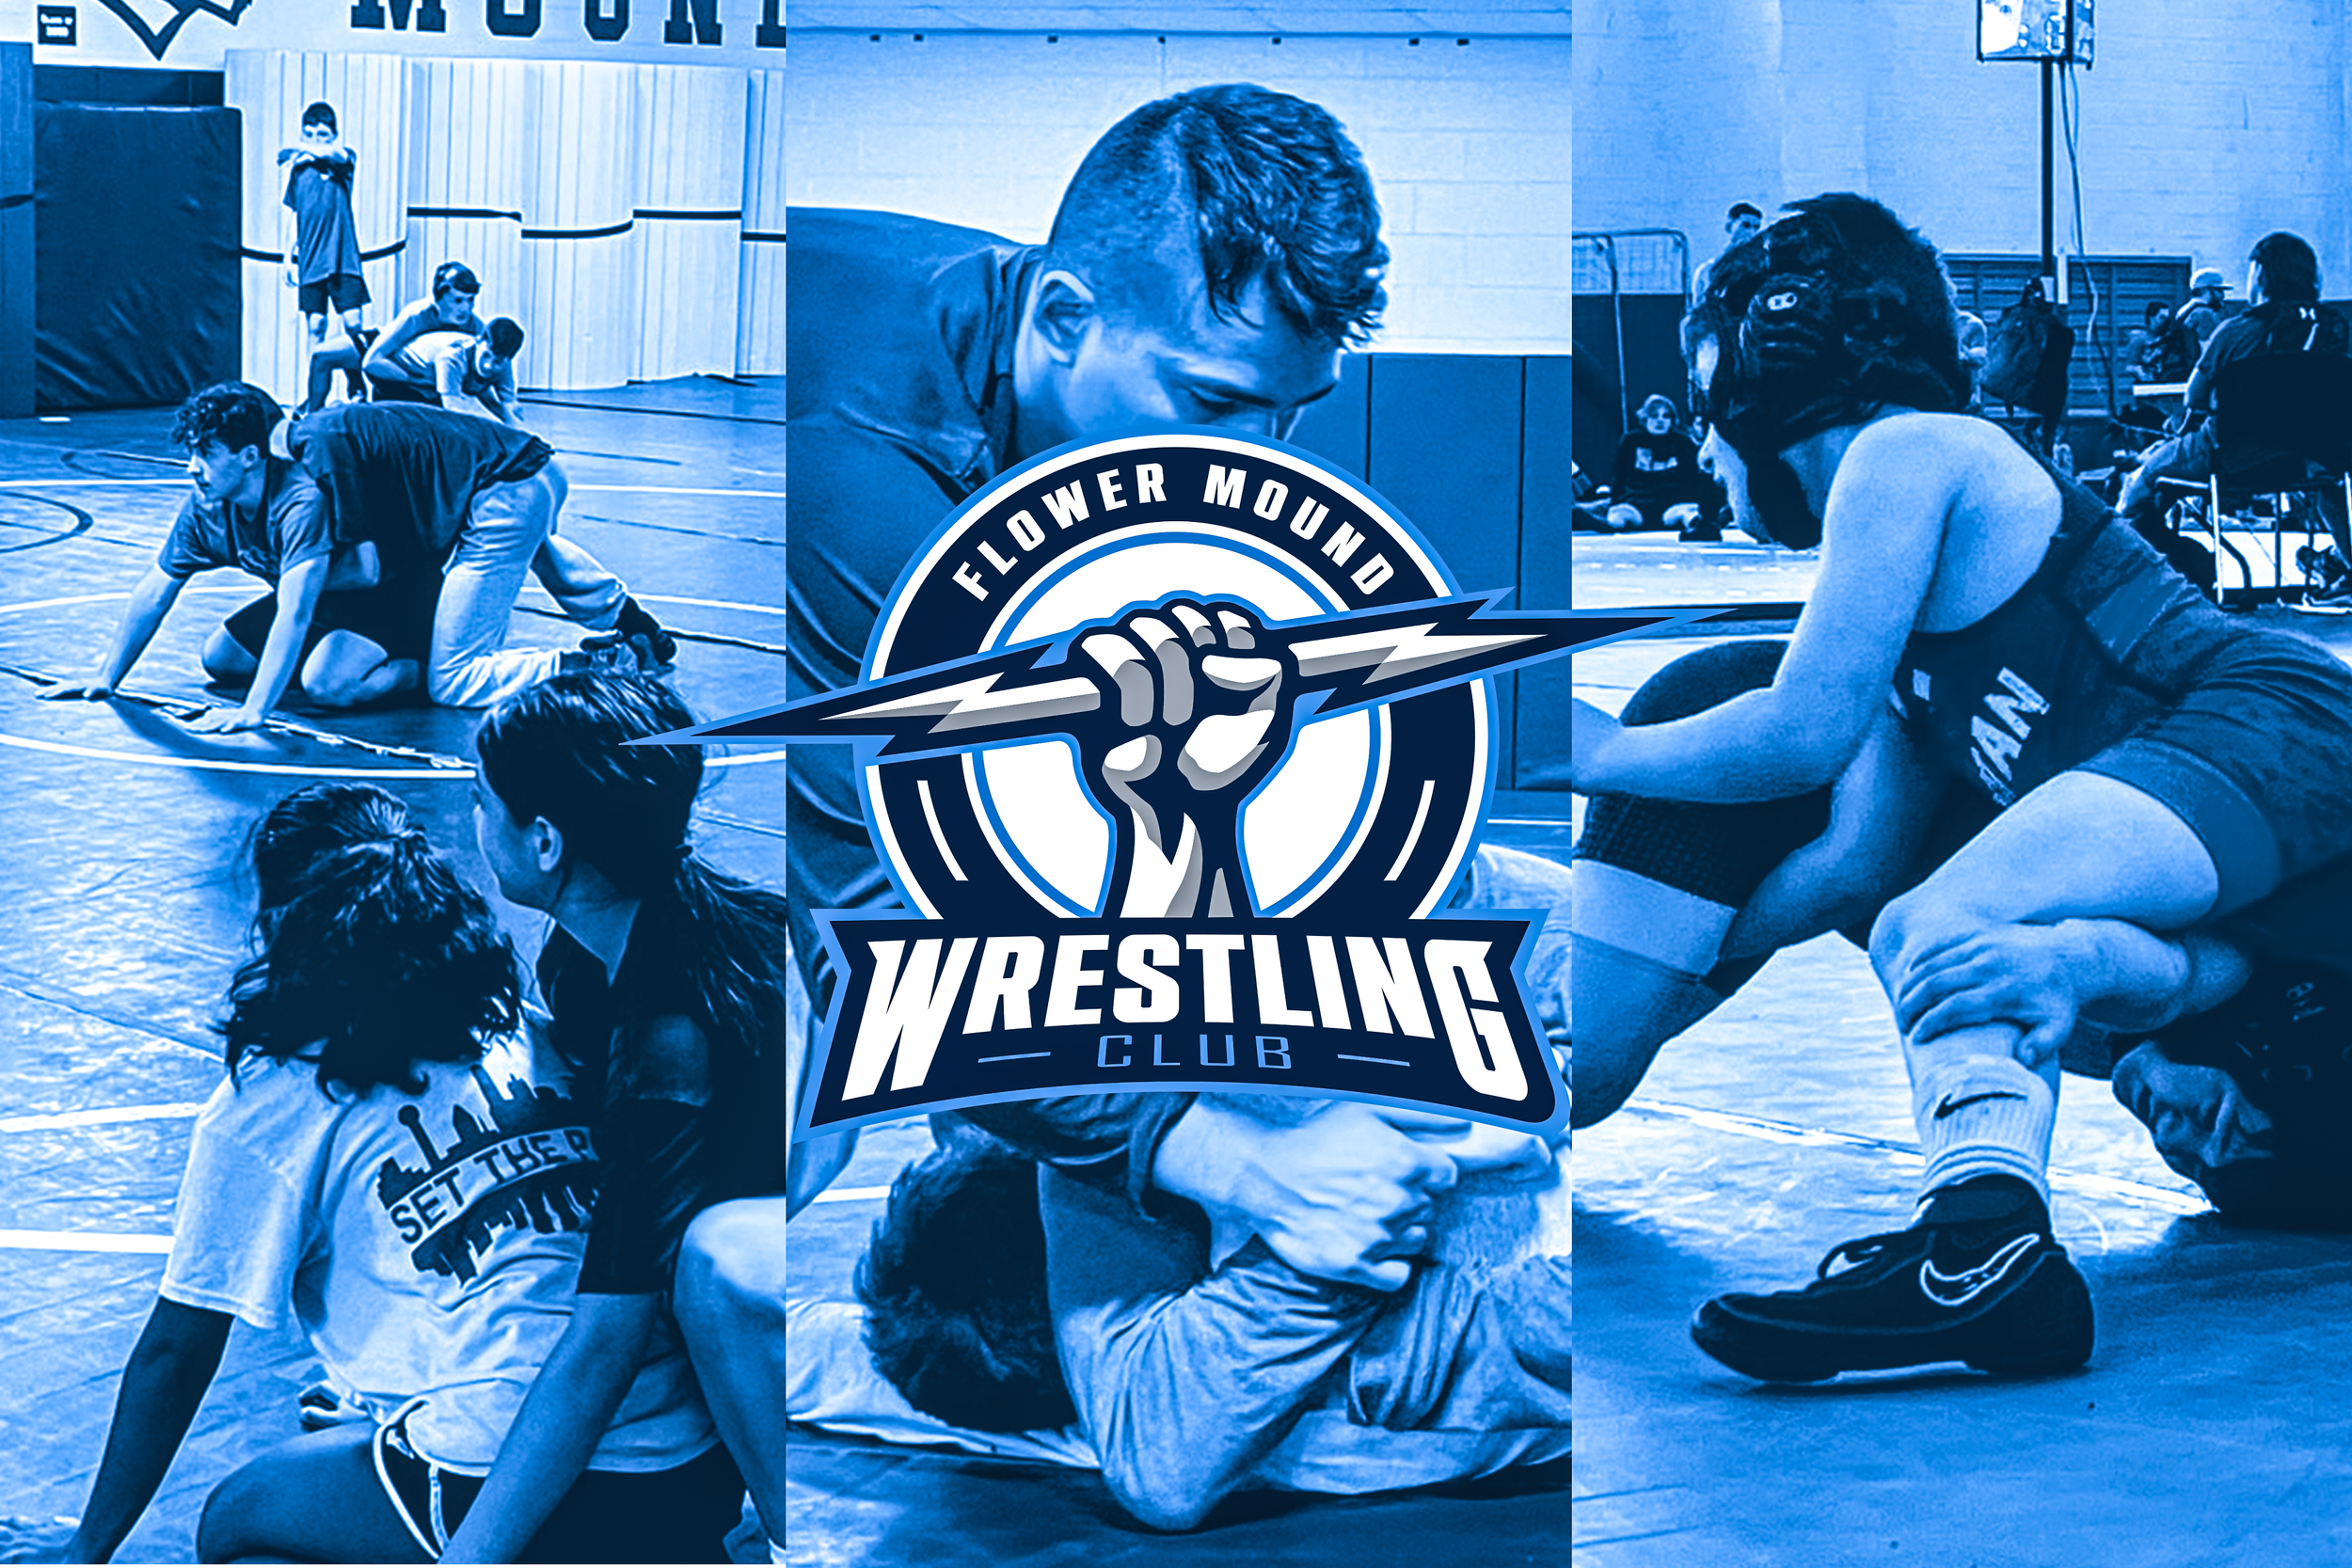 Flower Mound Wrestling Club - Home of the Bolts